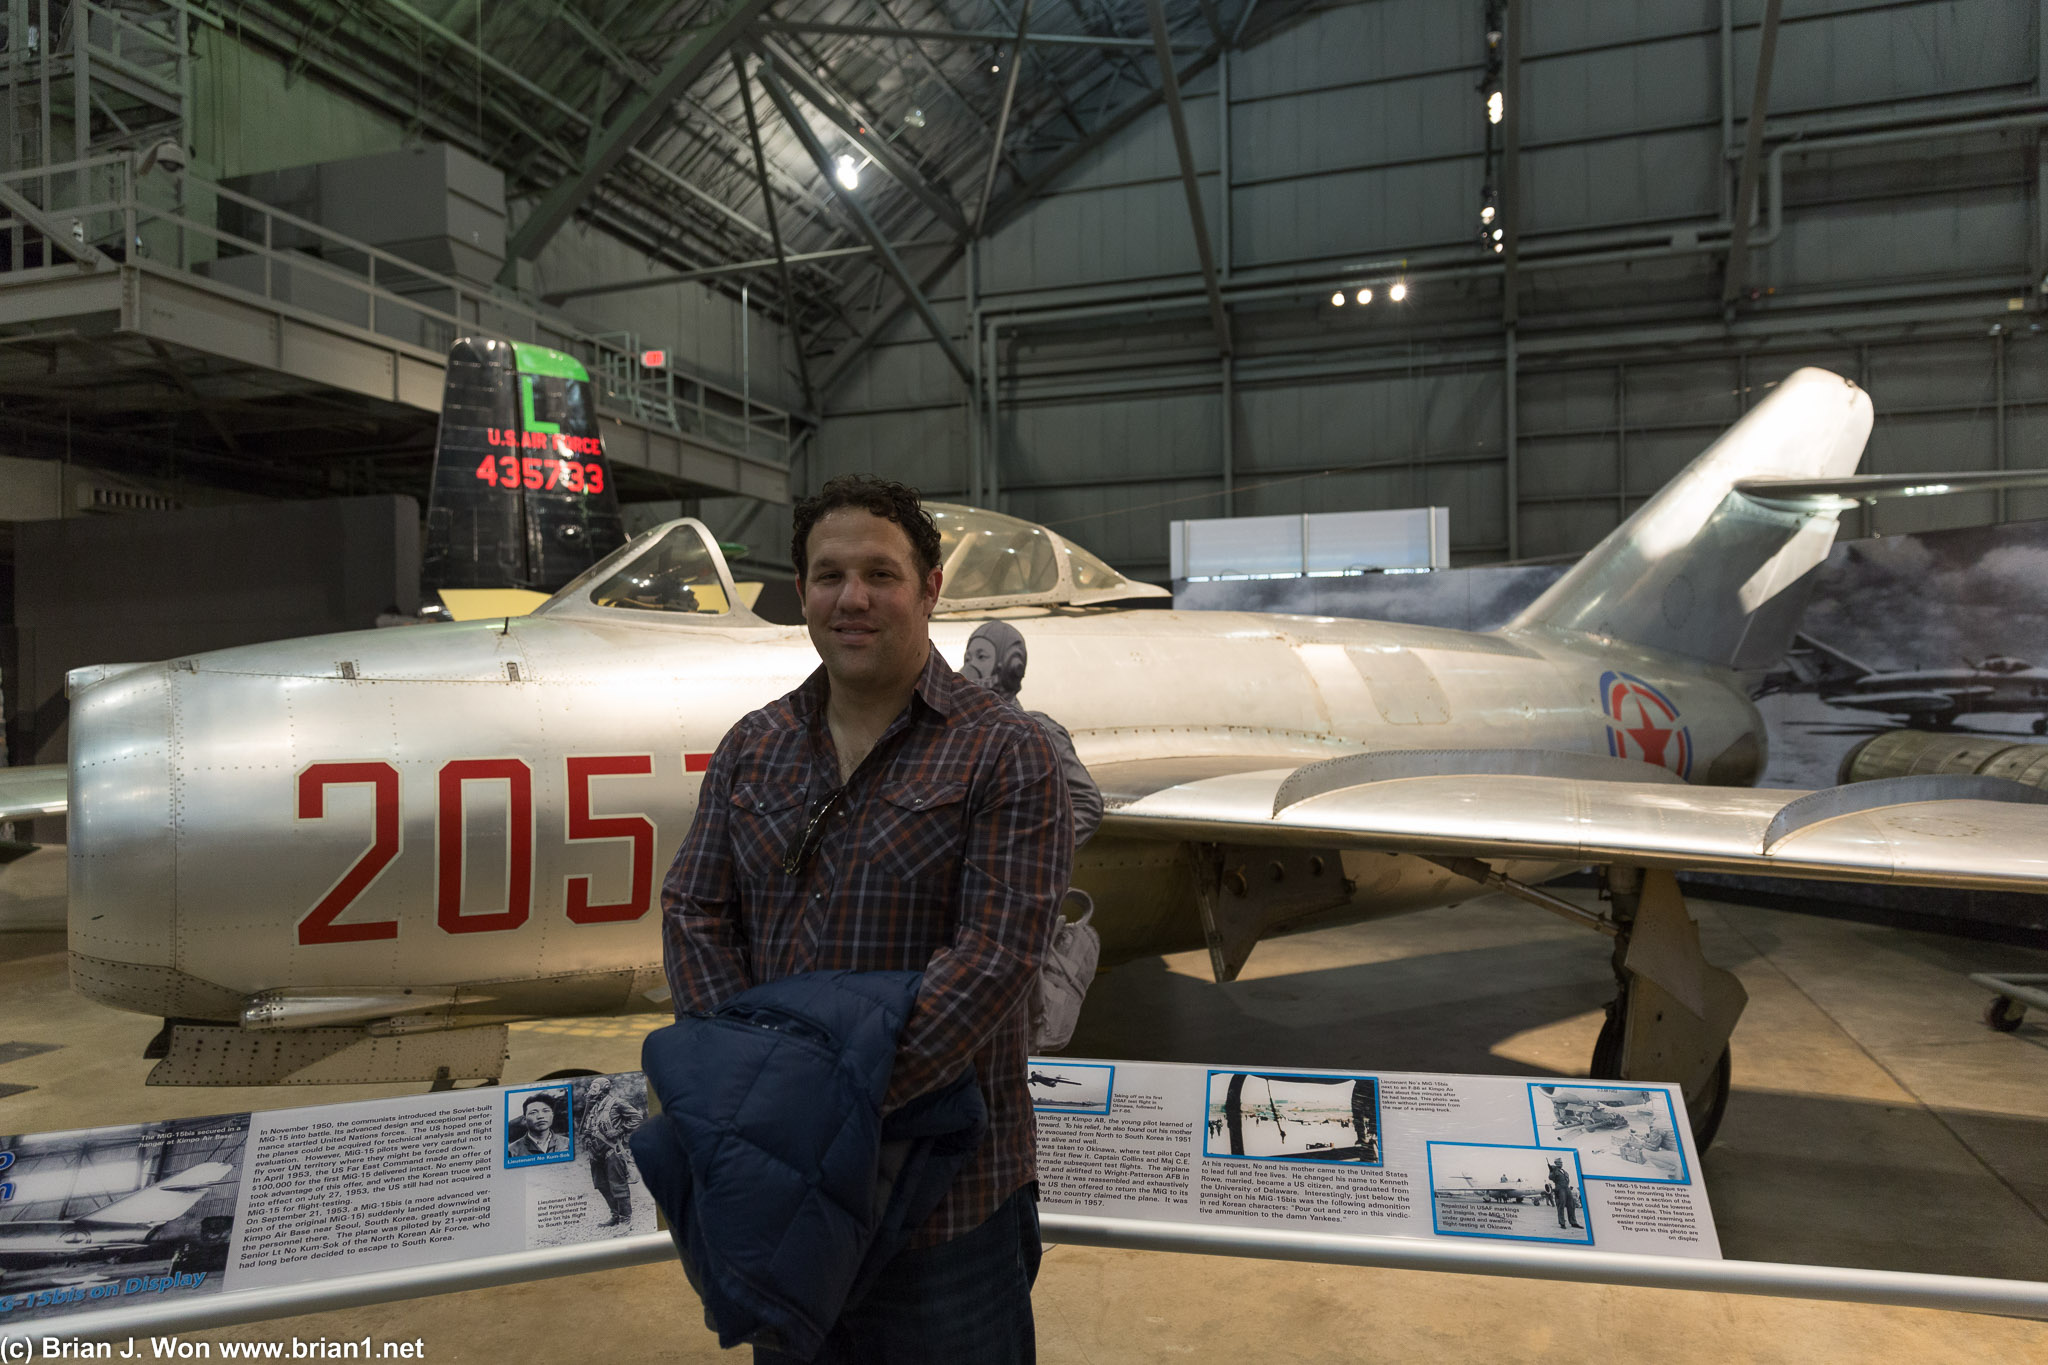 Mr. Moore in front of a MiG-15bis.